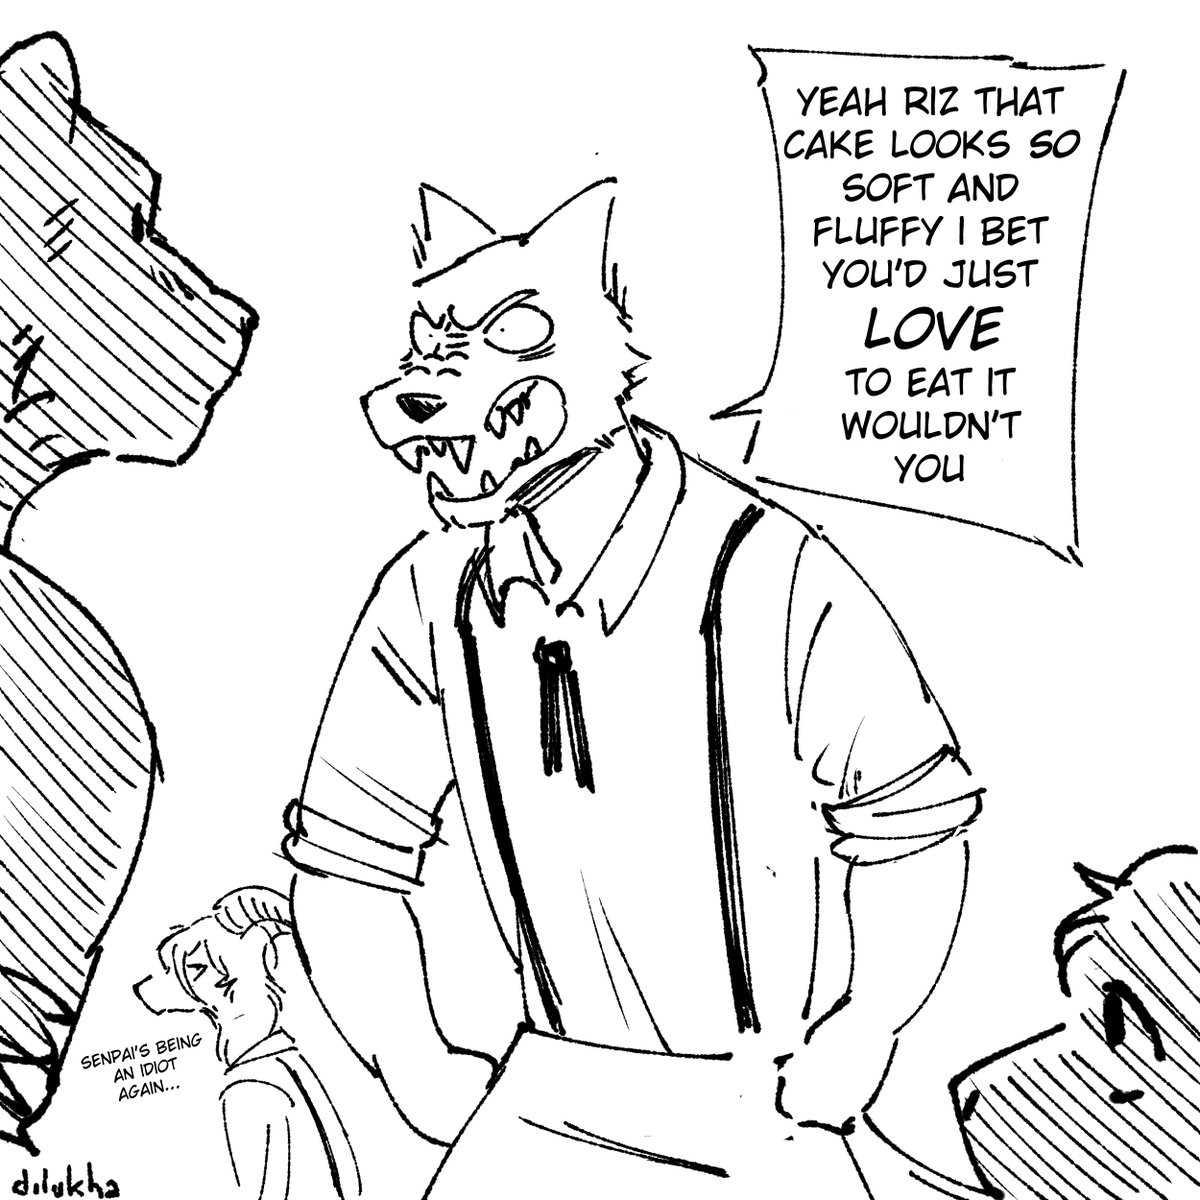 // beastars spoilers
.
.
.
Riz's birthday is December 11th which means it most likely happenned like halfway in the murder res arc after Legosi found him out and given their club dynamic i can't stop thinking about how it went down
#BEASTARS #beastarsfanart 